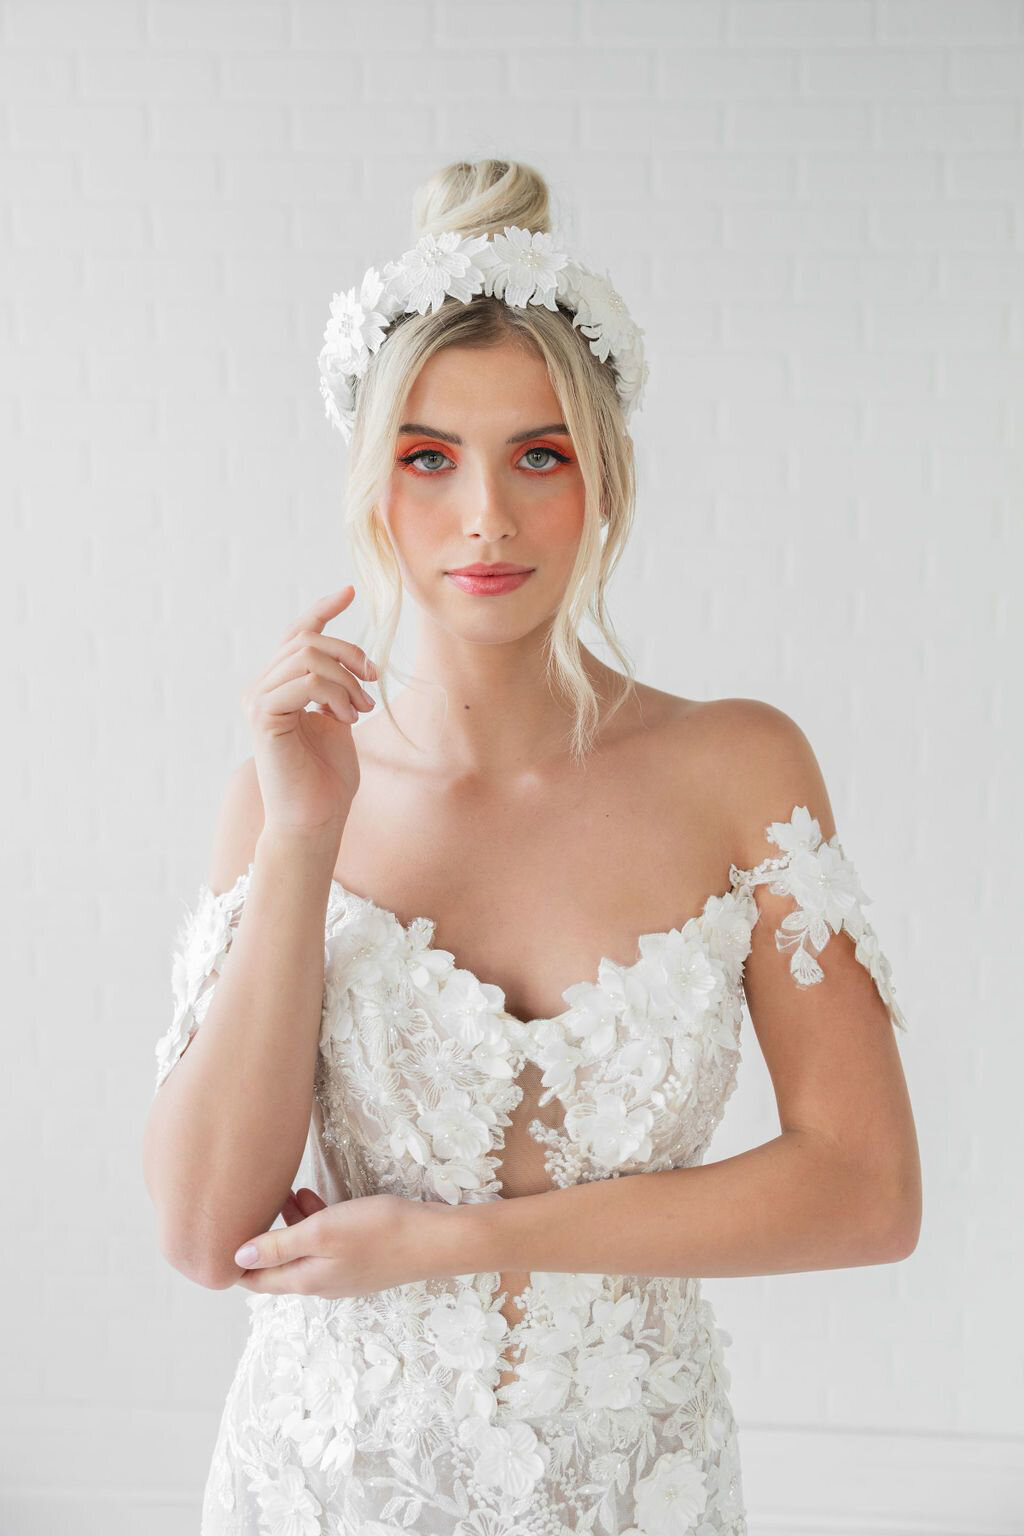 White floral headband by Blair Nadeau Bridal Adornments, romantic and modern wedding jewelry based in Brampton.  Featured on the Brontë Bride Vendor Guide.